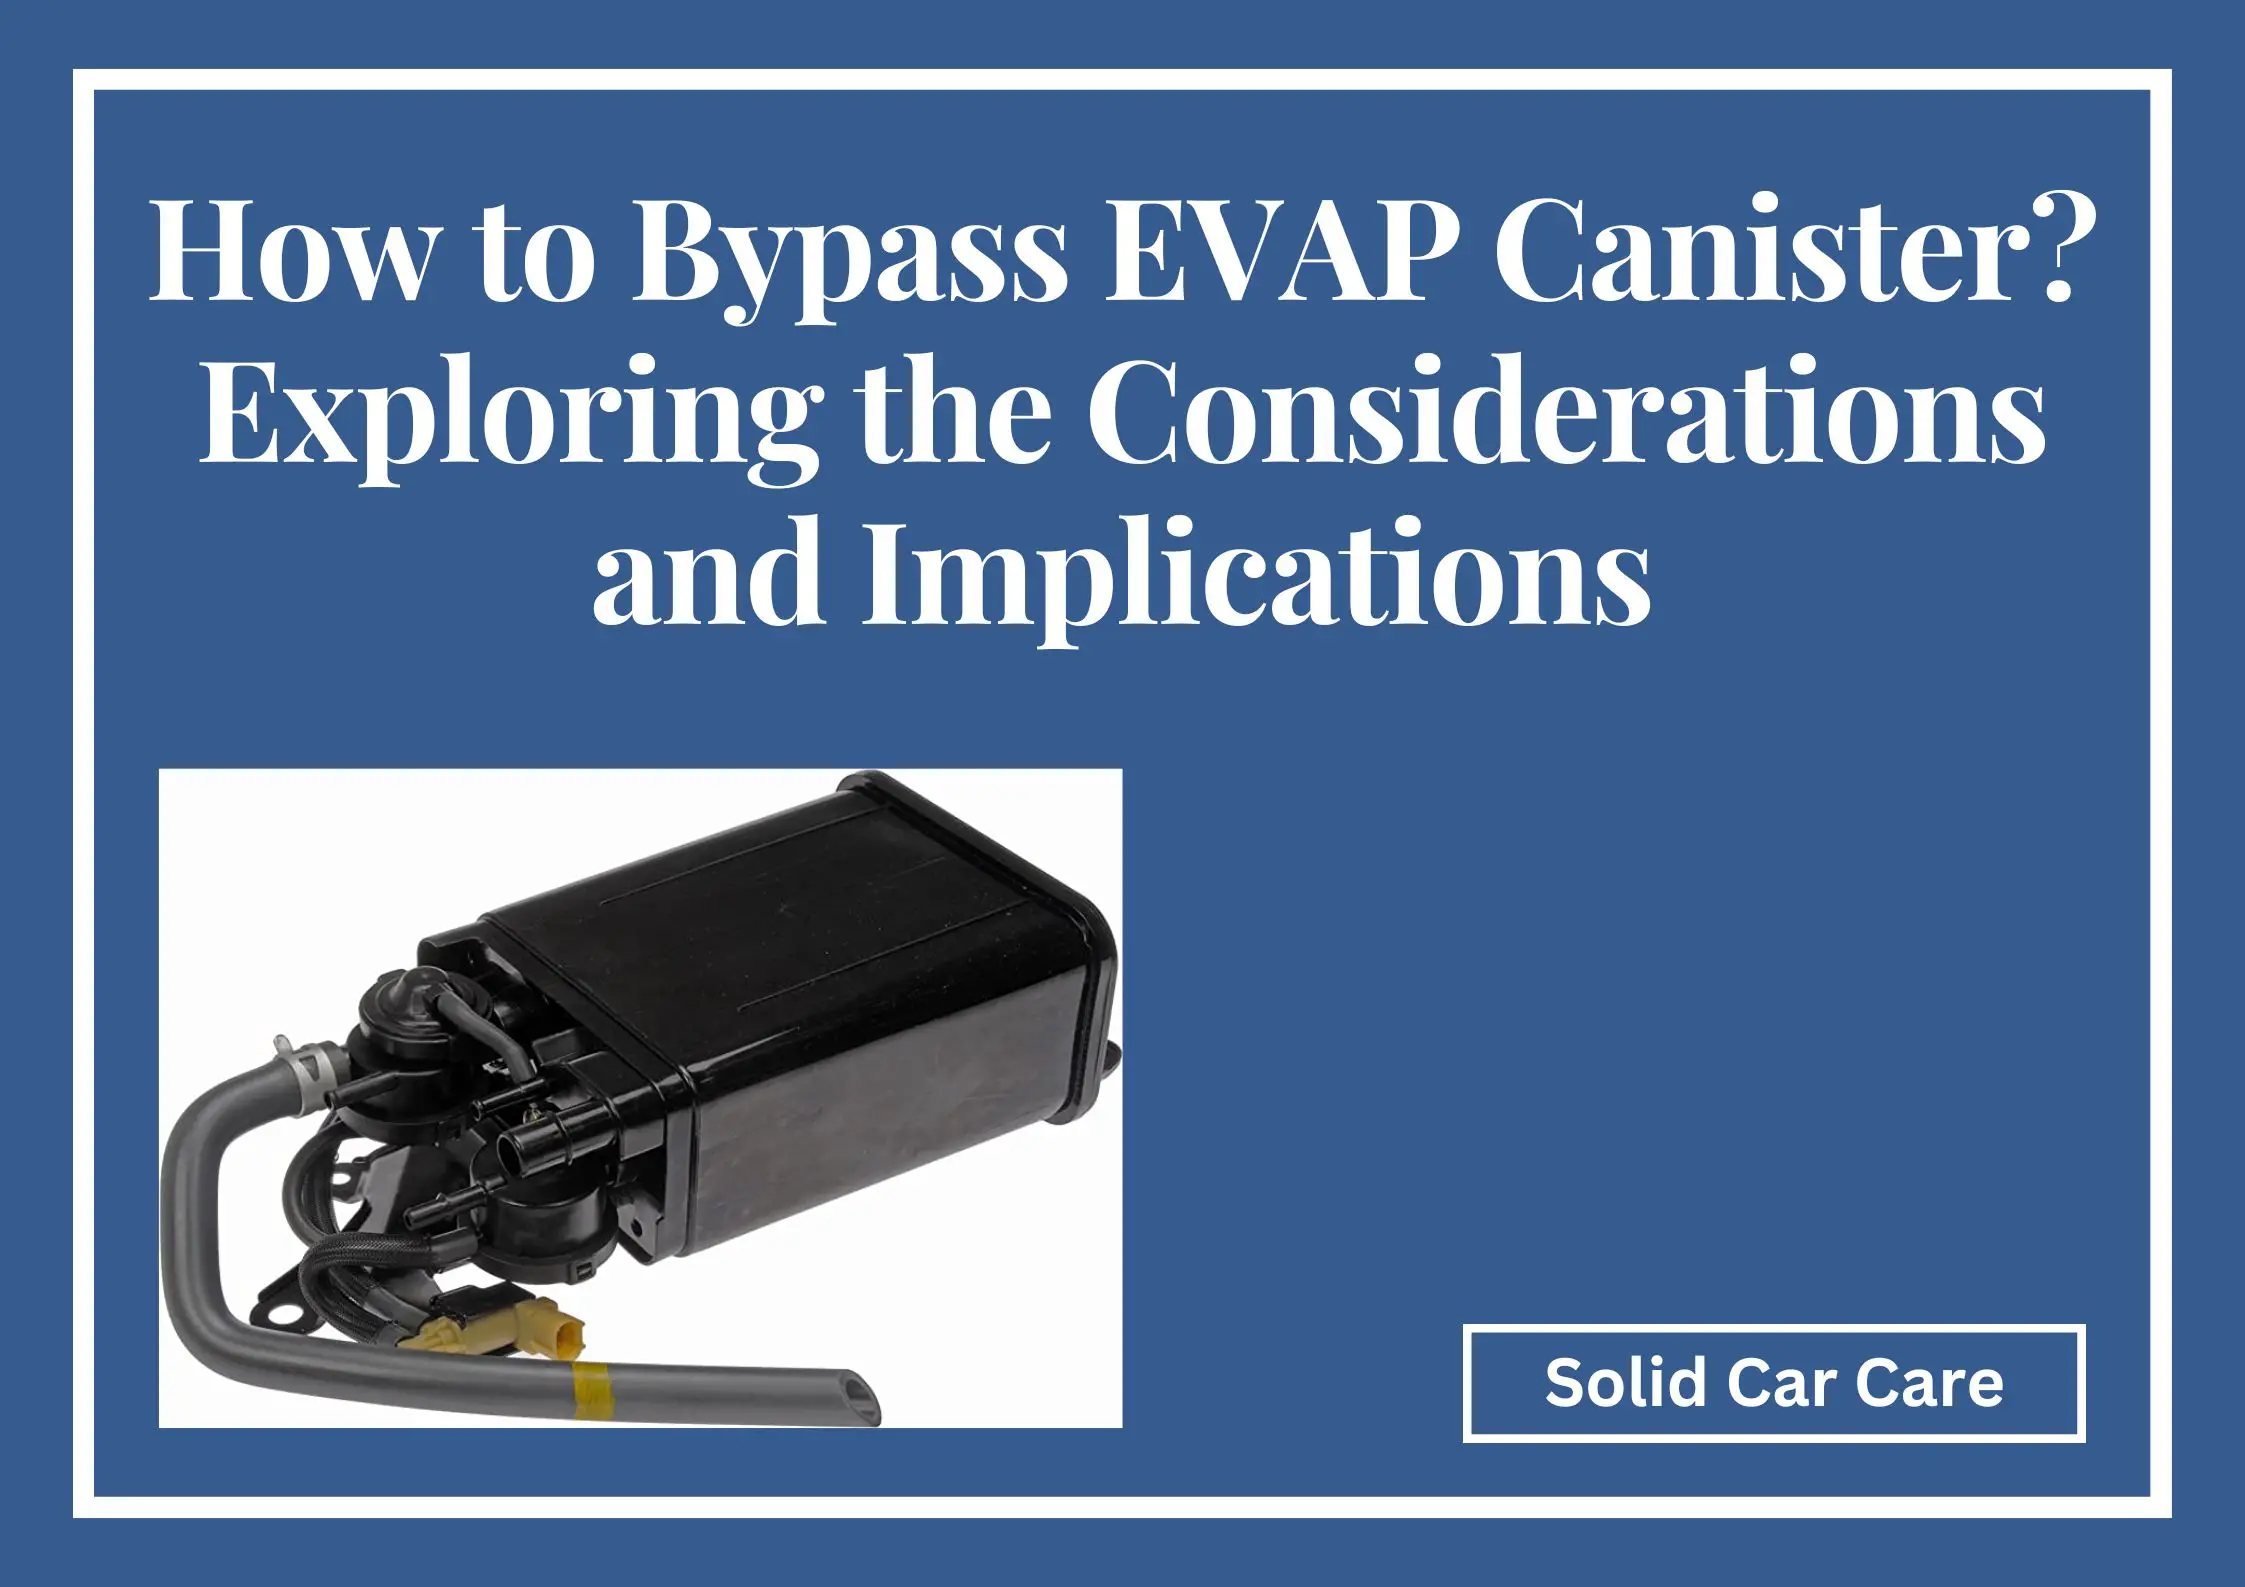 How to Bypass EVAP Canister